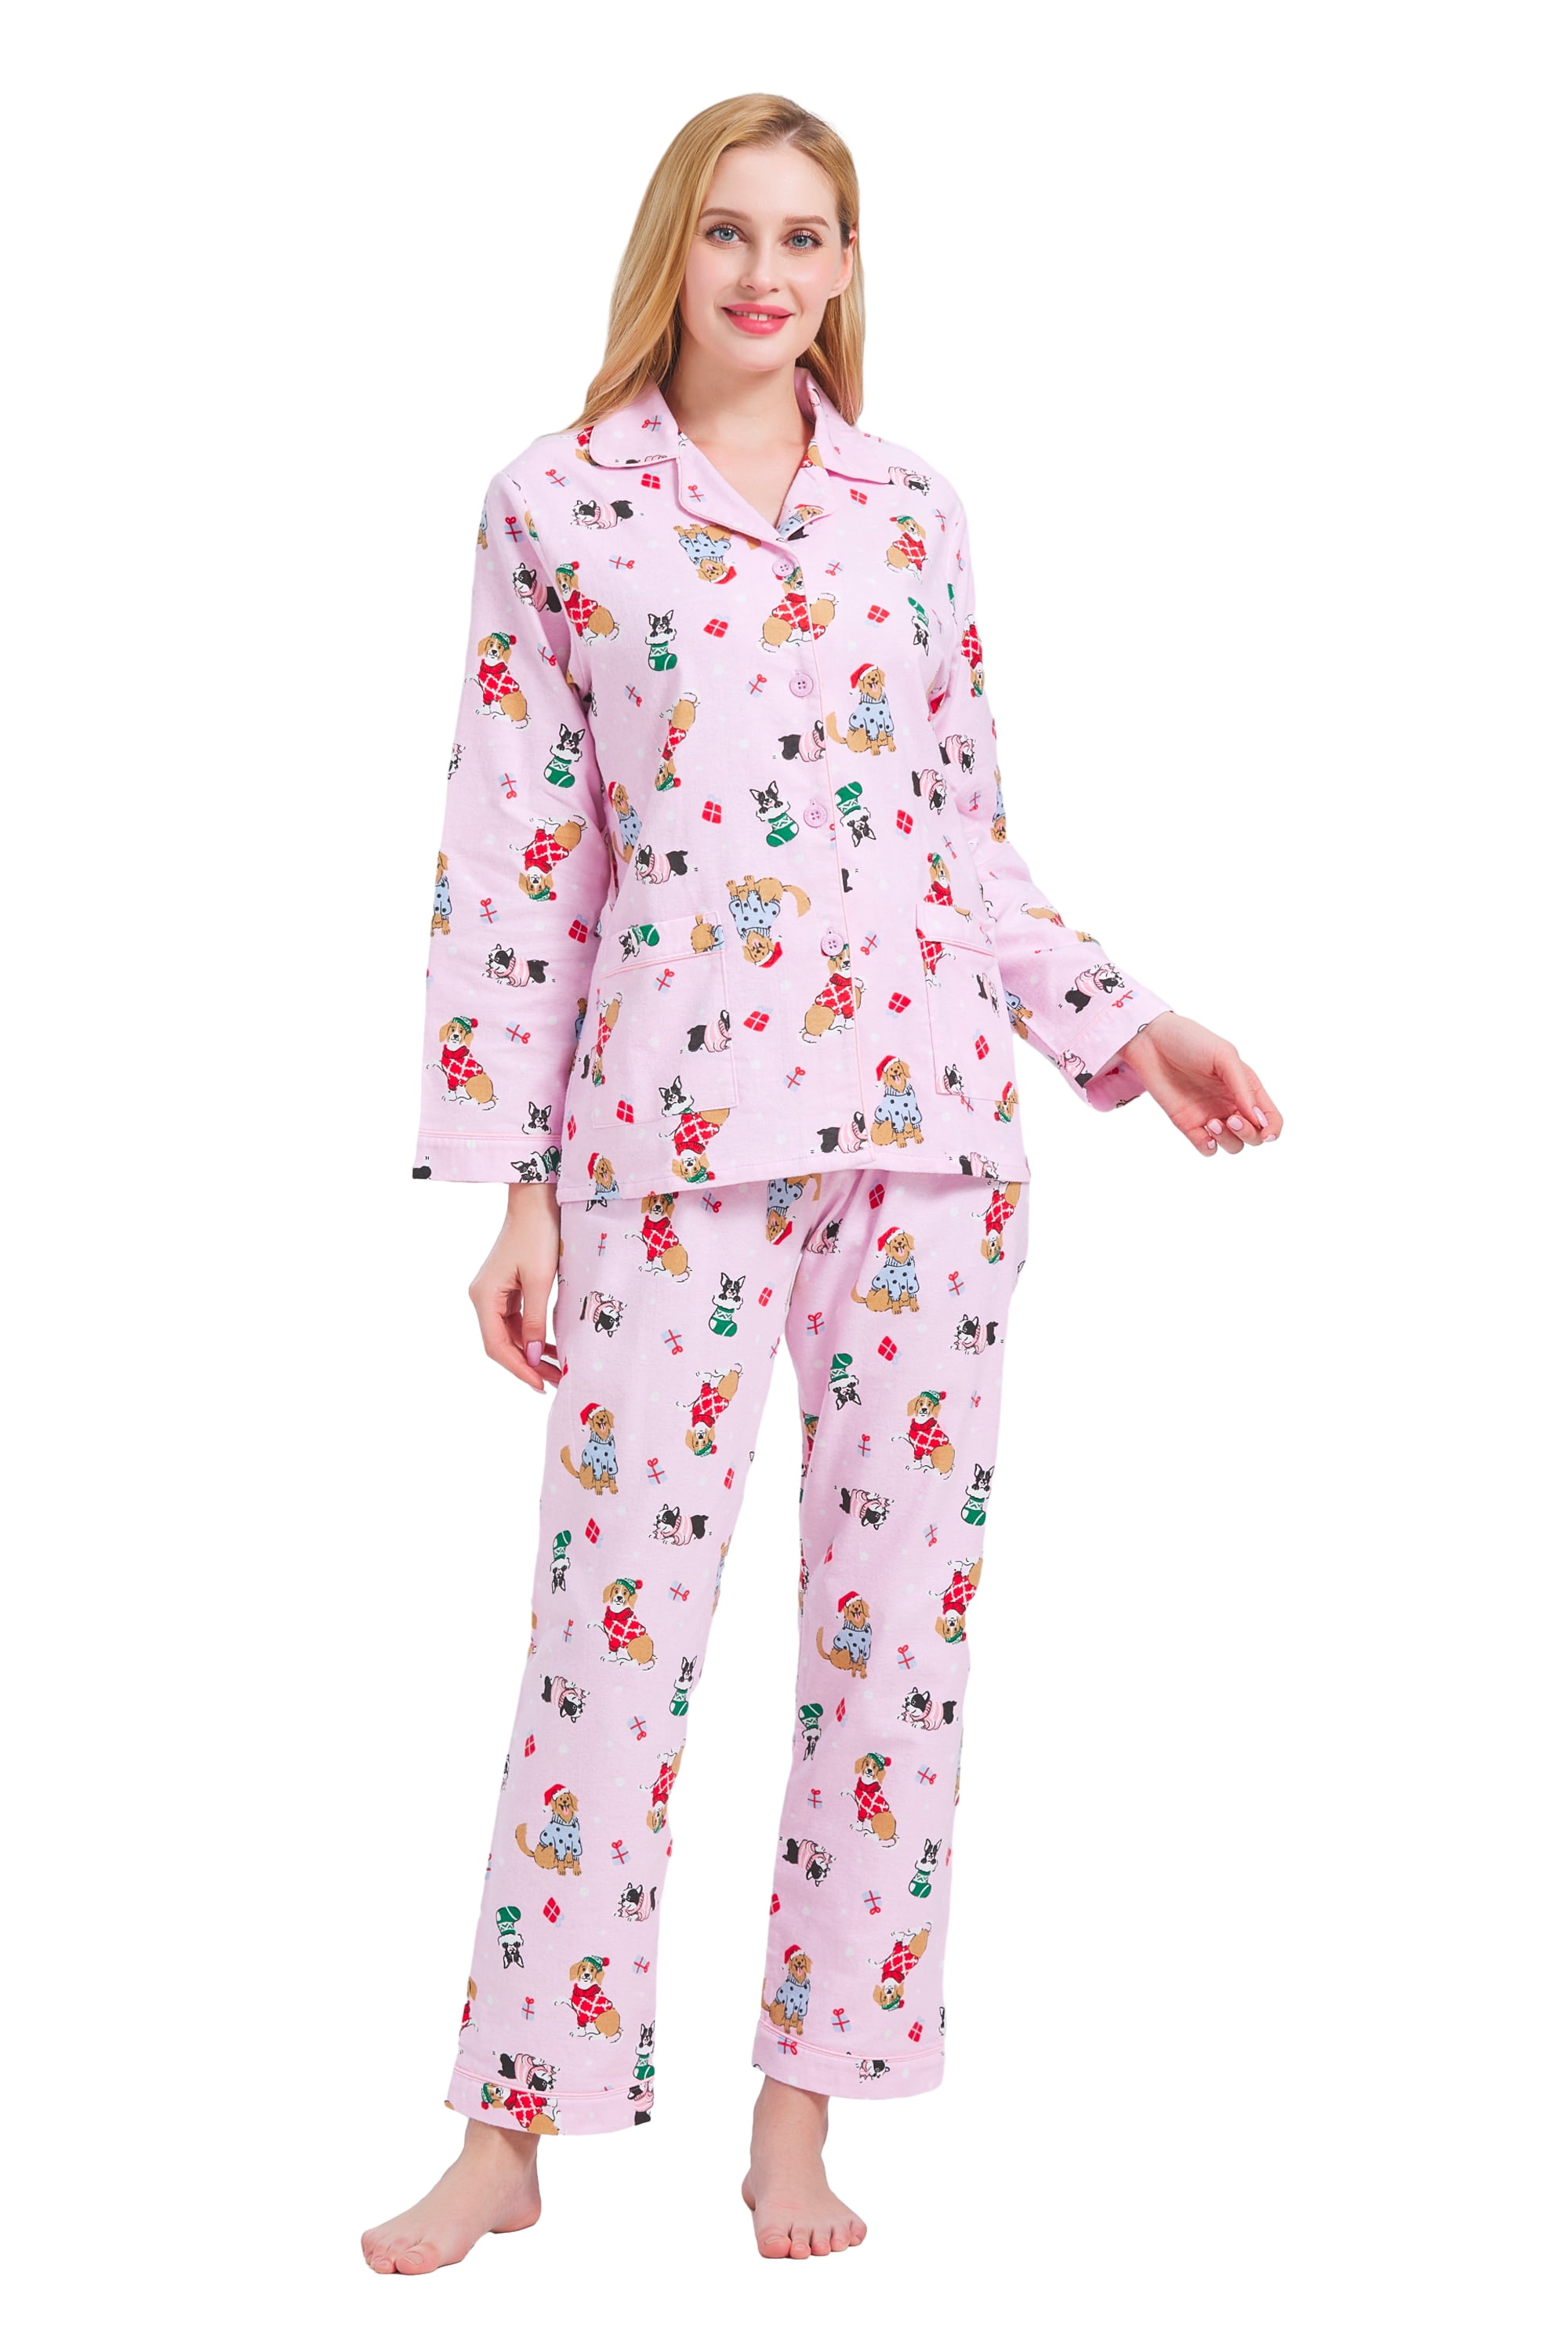 GLOBAL 100% Cotton Comfy Flannel Pajamas for Women 2-Piece Warm and ...